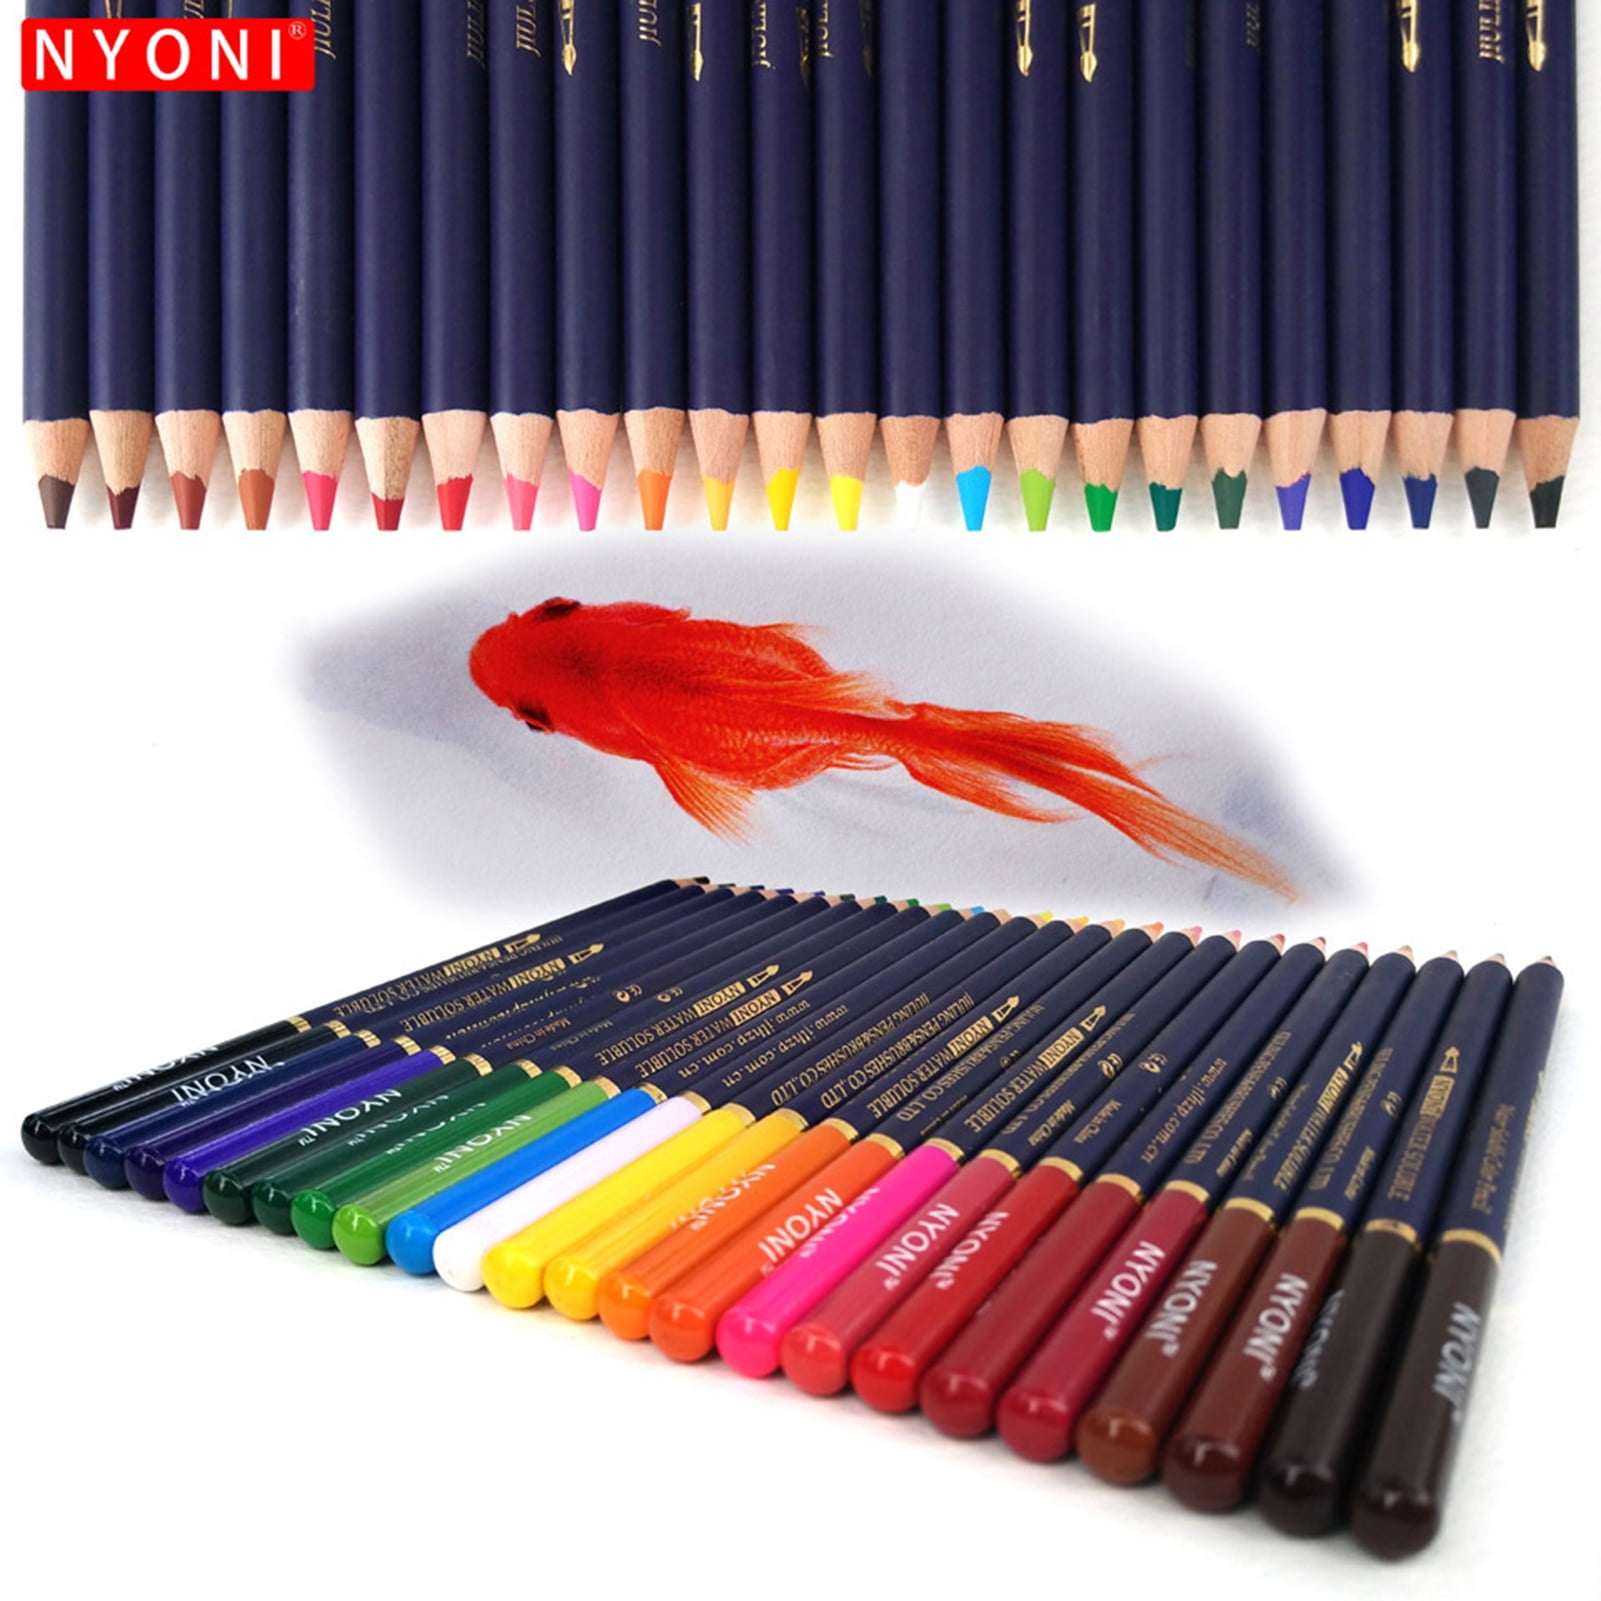 24/36/48/72 Colored Water Soluble Pencil Set Professional Color Pencils  Soluble Pencil Sketch Color Pencil Drawing Stationery Art Drawing Pencils  Graffiti Pencils Set